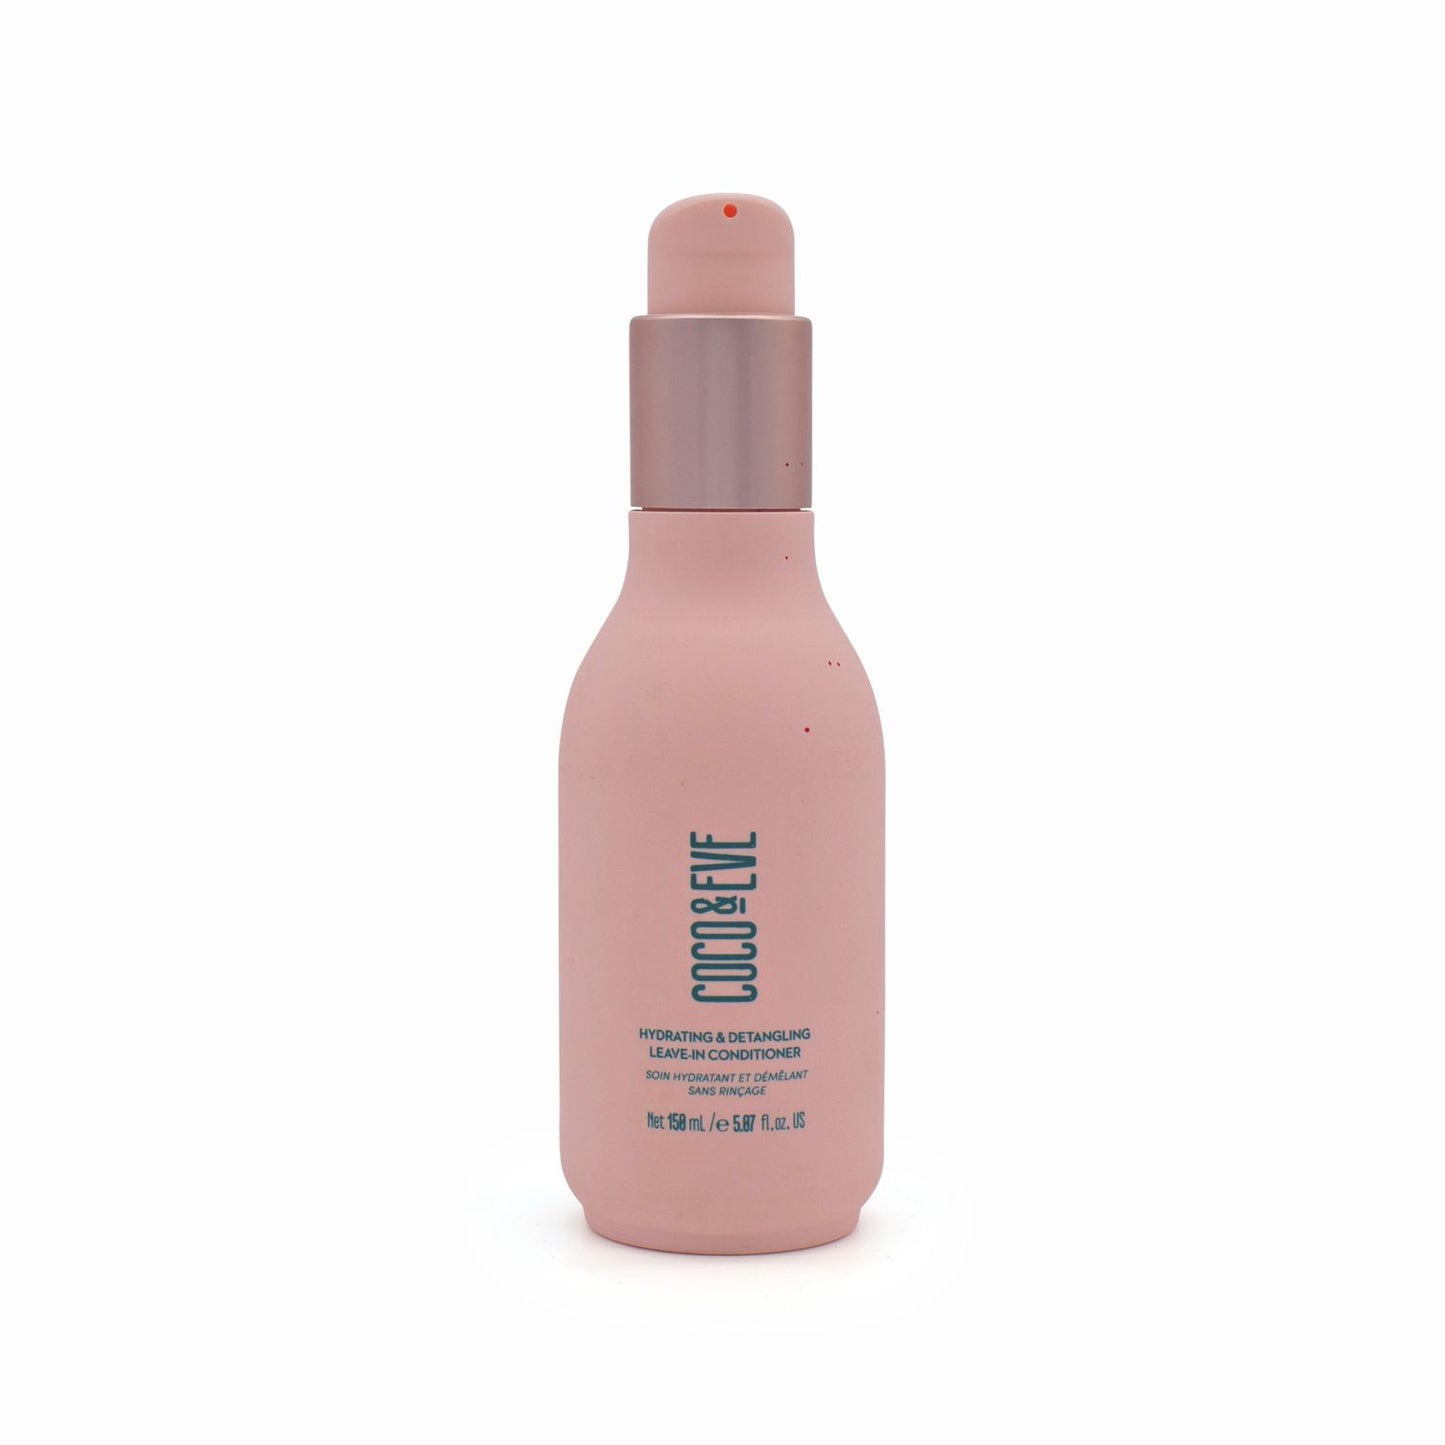 Coco & Eve Hydrating & Detangling Leave-In Conditioner 150ml - Imperfect Container